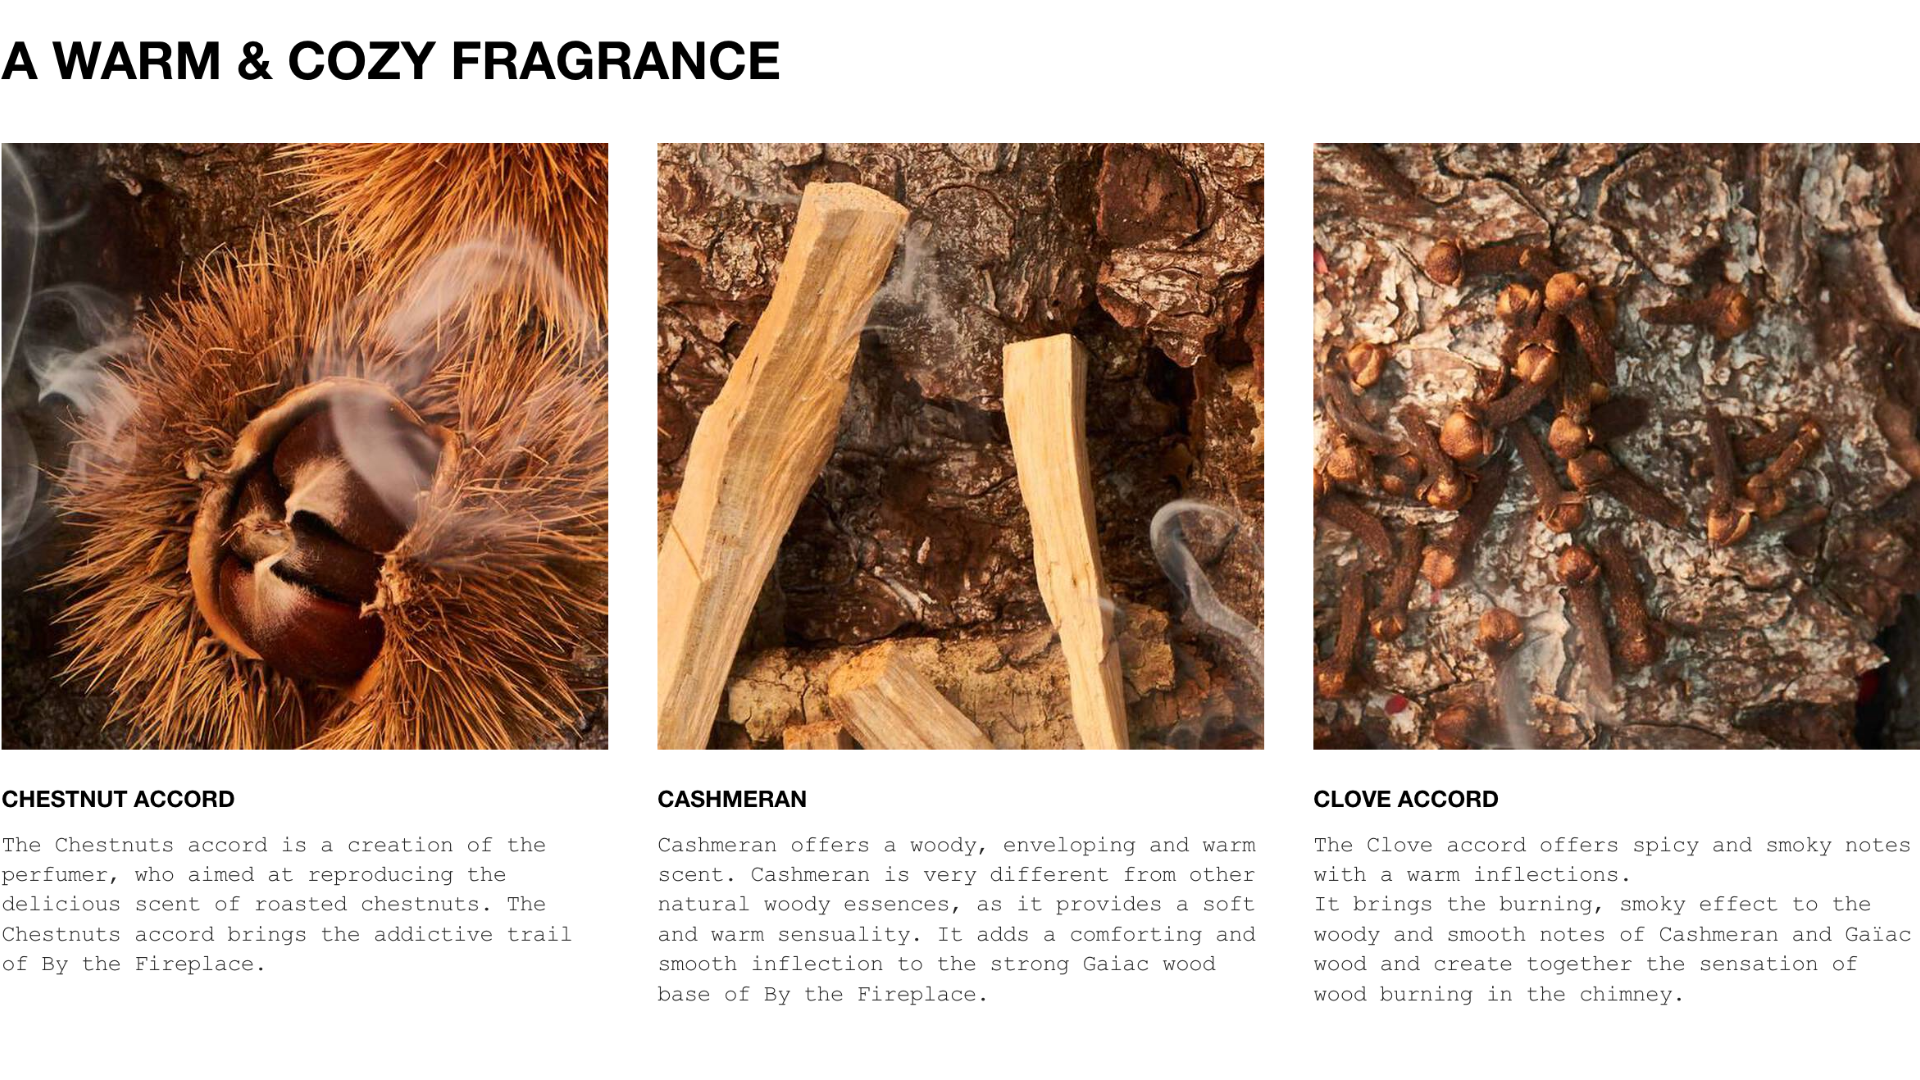 Describes what kind of fragrance Maison Margiela by the fireplace is
